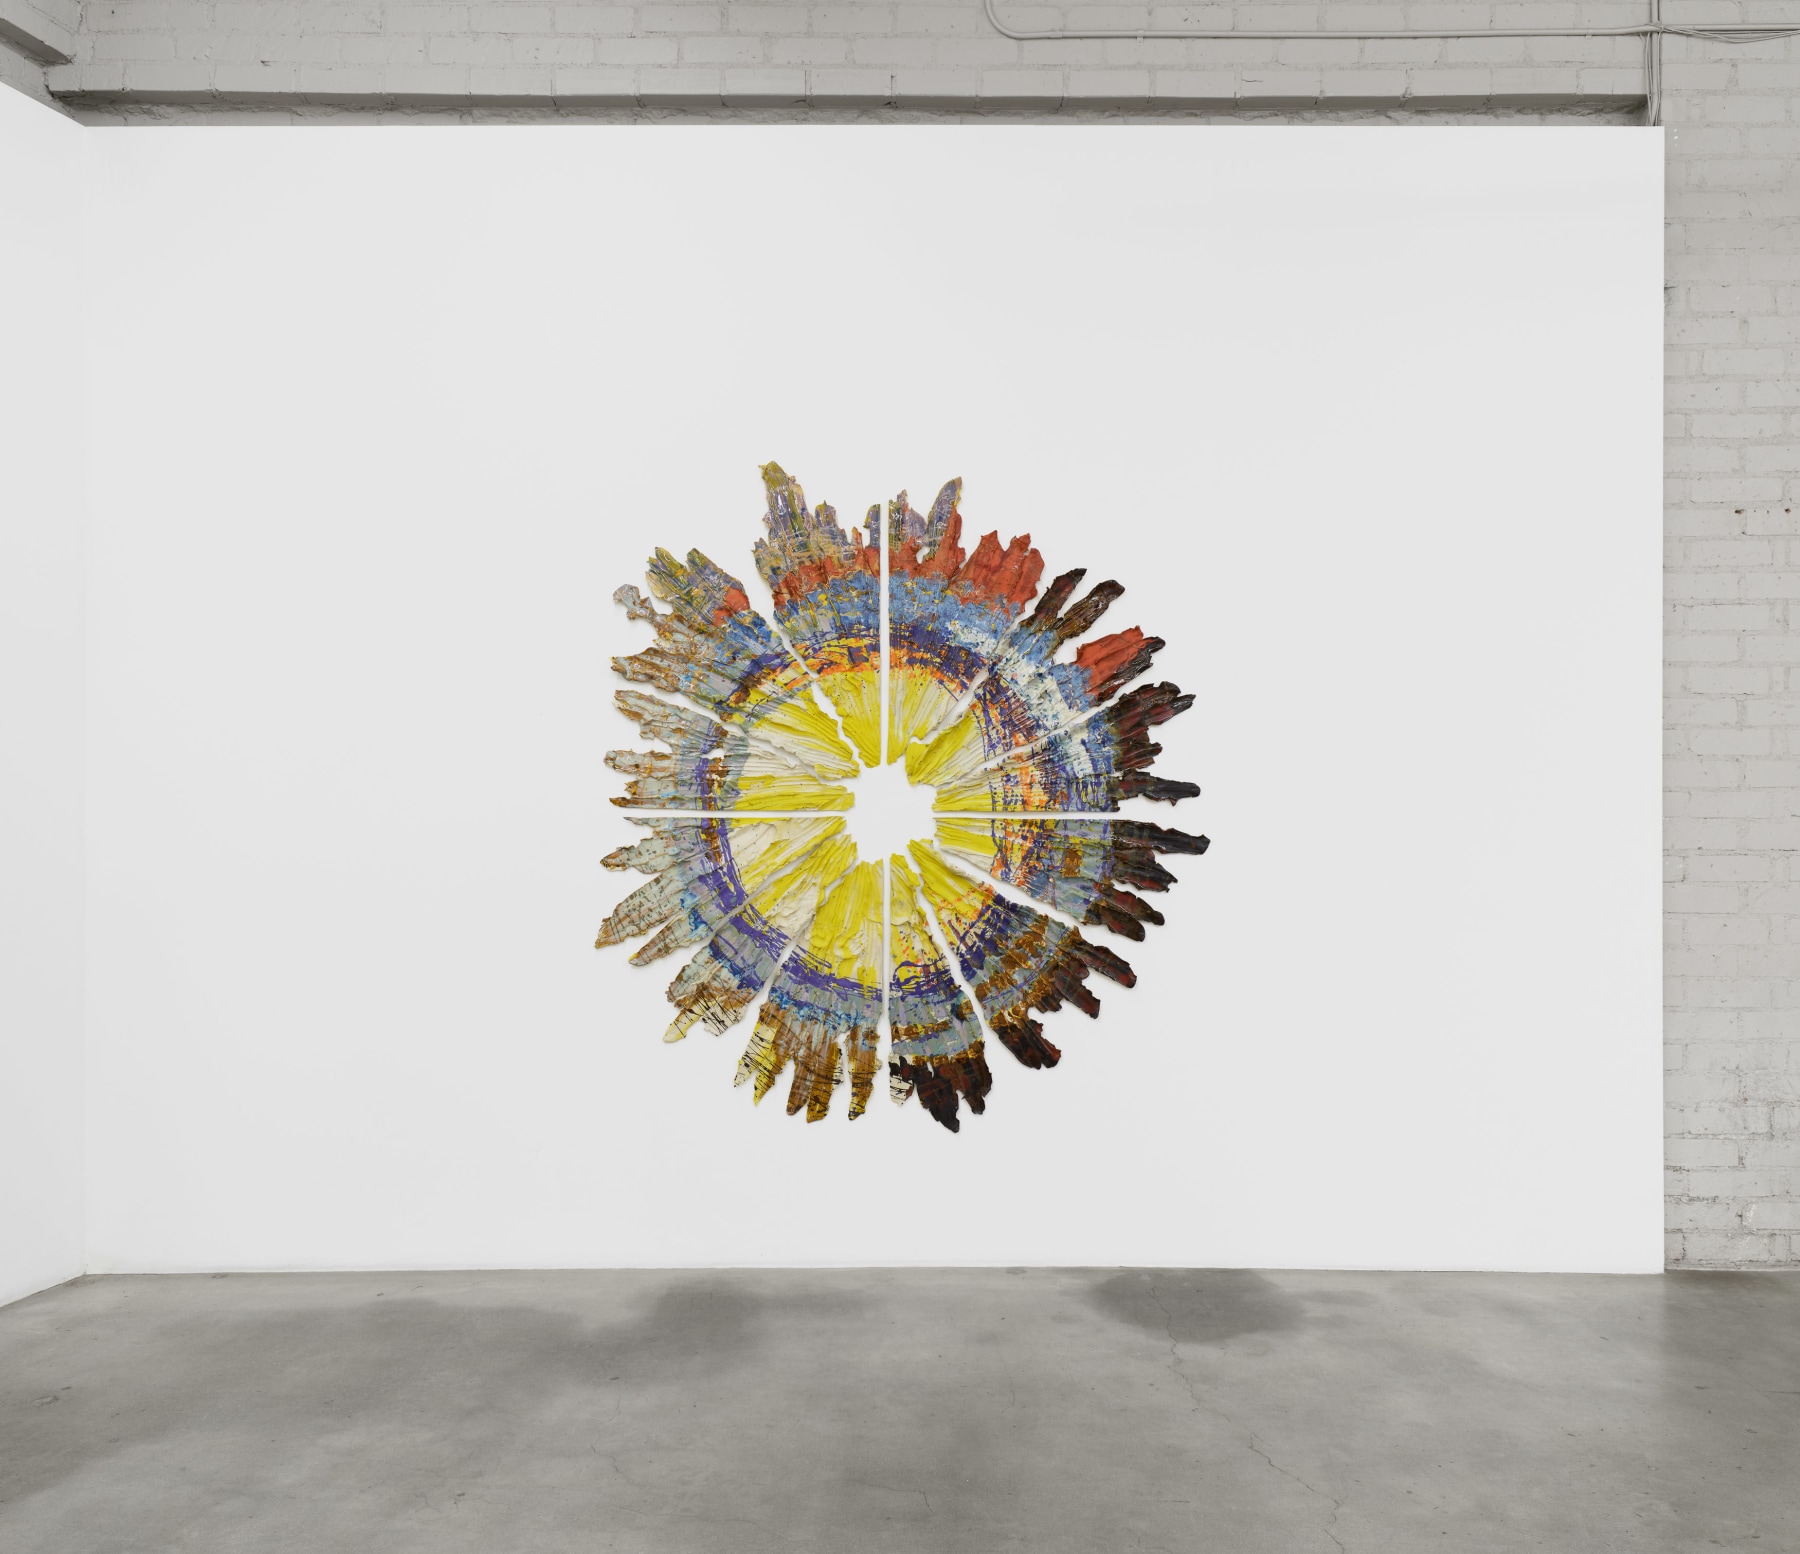 Brie Ruais, Closing in on Opening Up, Nevada Site 6, 127lbs, 2020, installation view in Spiraling Open and Closed Like an Aperture, 2020